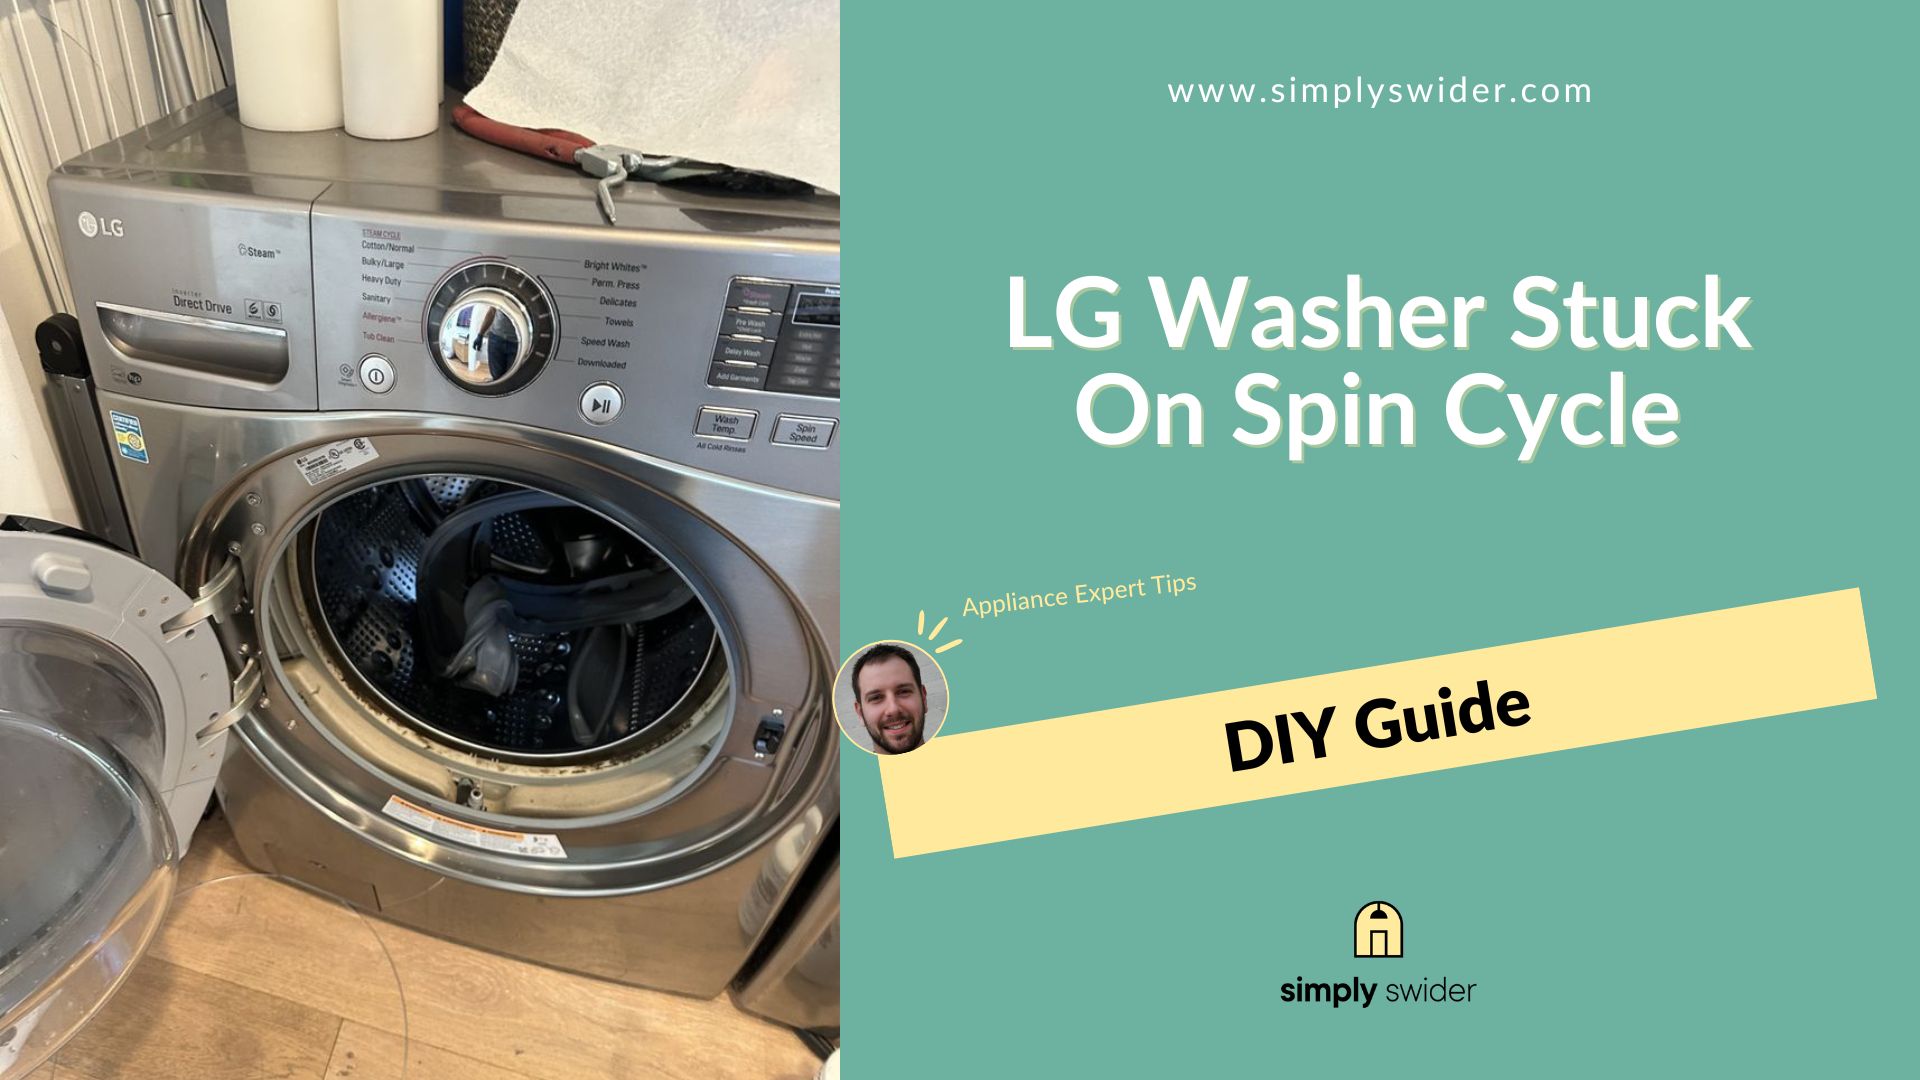 LG Washer Stuck On Spin Cycle